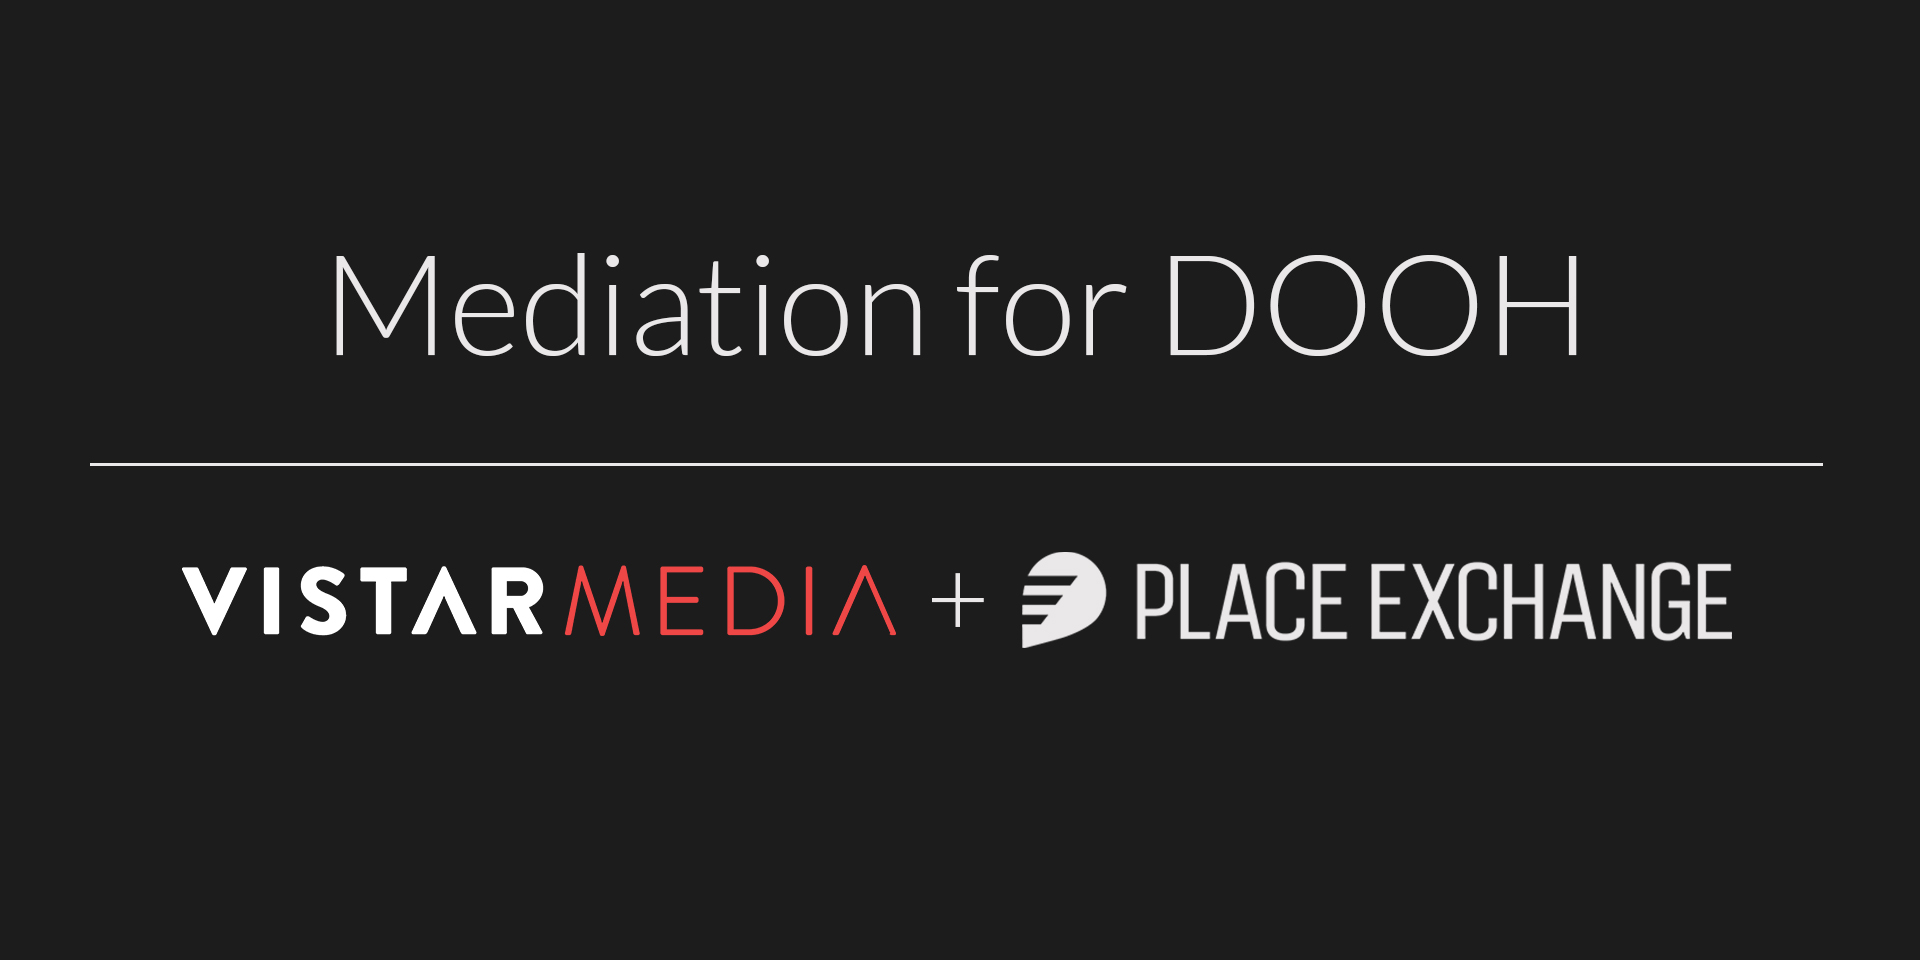 Vistar Media and Place Exchange Enable Mediation for DOOH